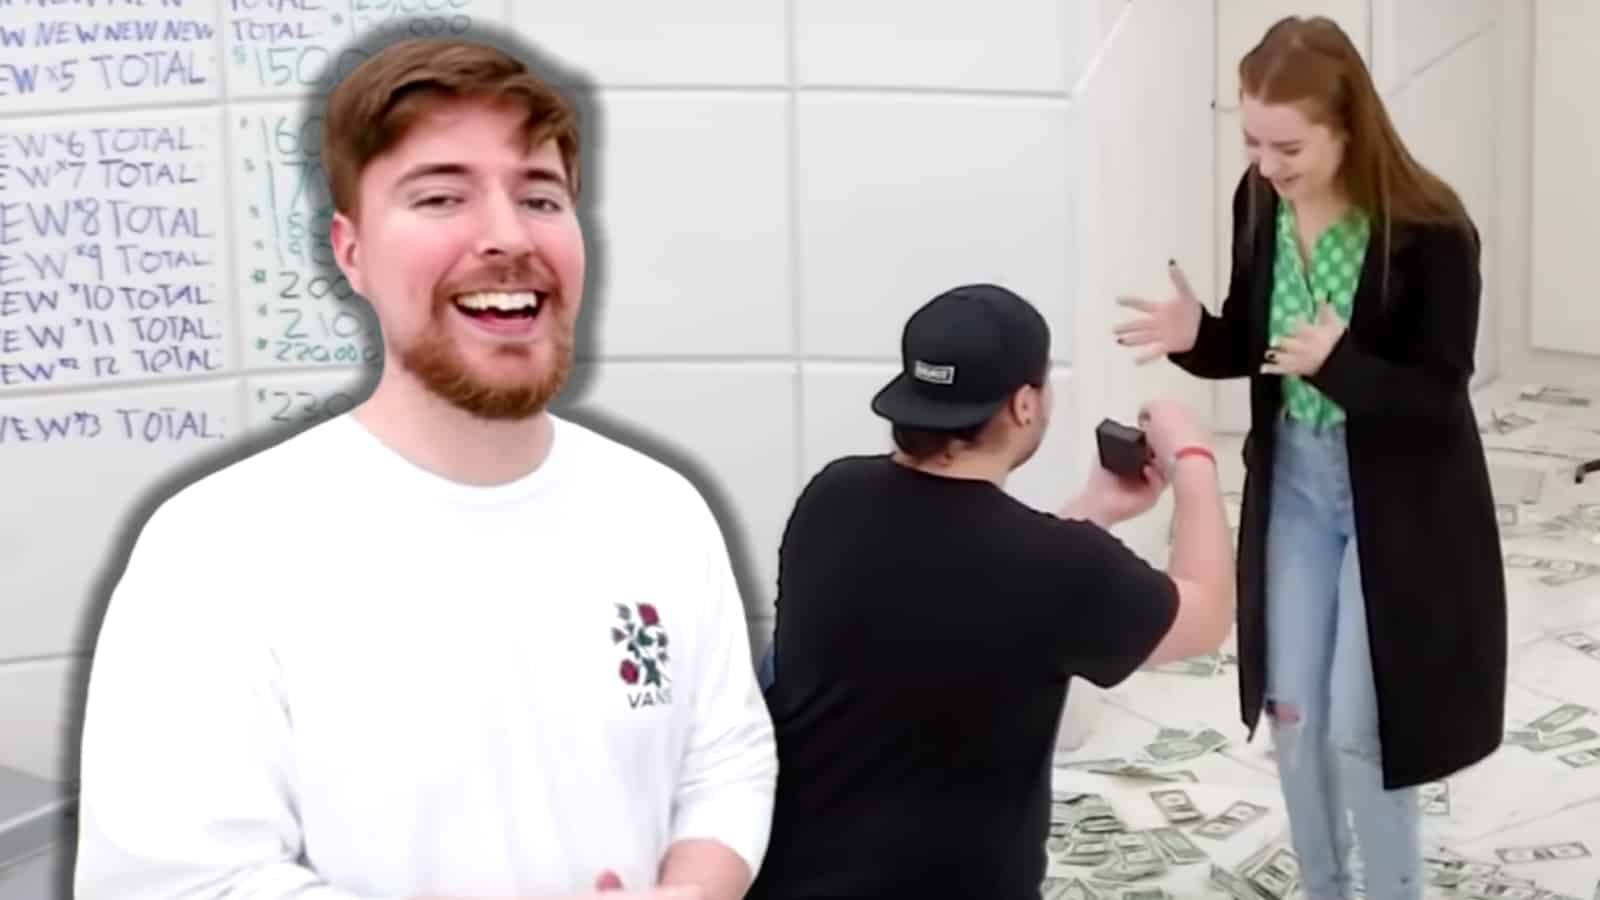 Couple proposes in MrBeast video